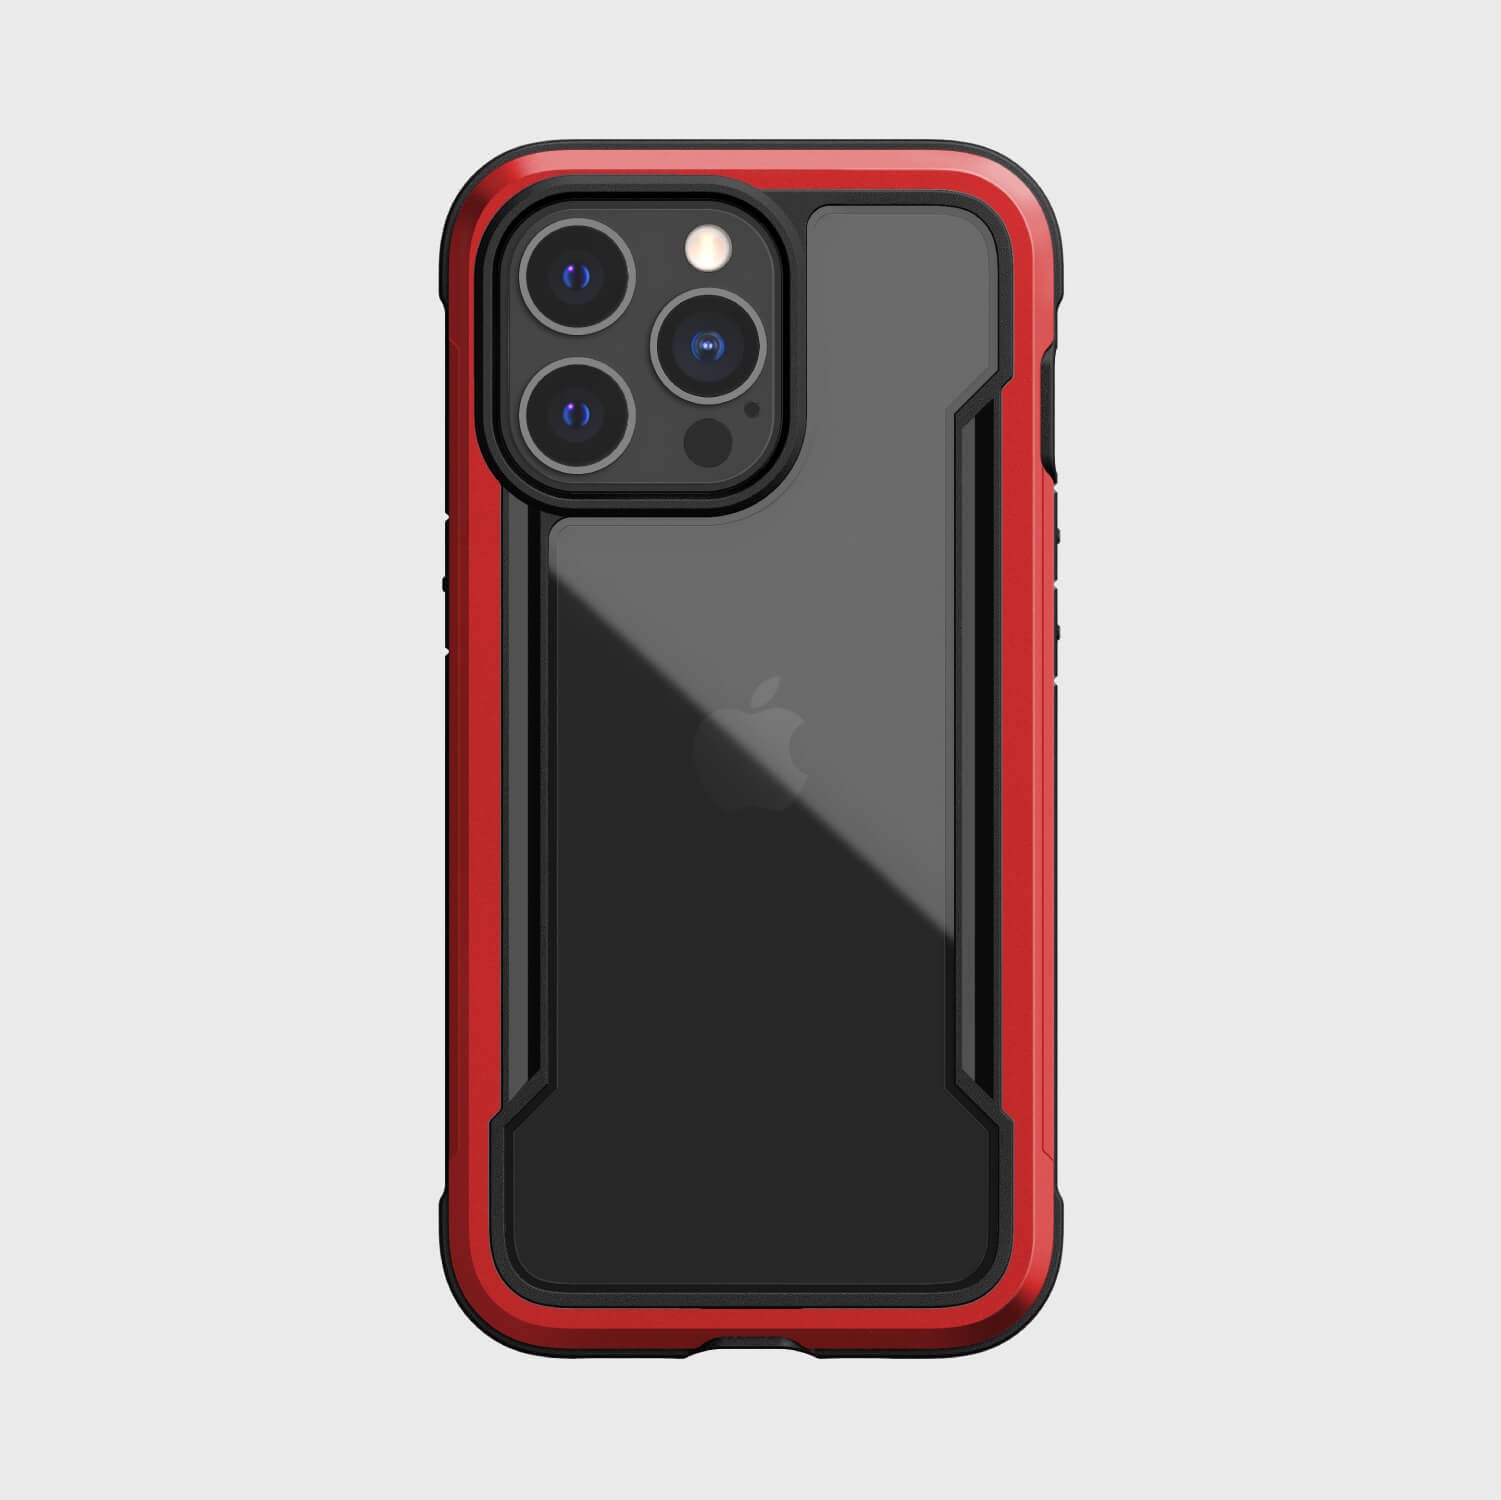 The Raptic SHIELD PRO iPhone 13 Pro Max case offers drop protection in a sleek red and black design.